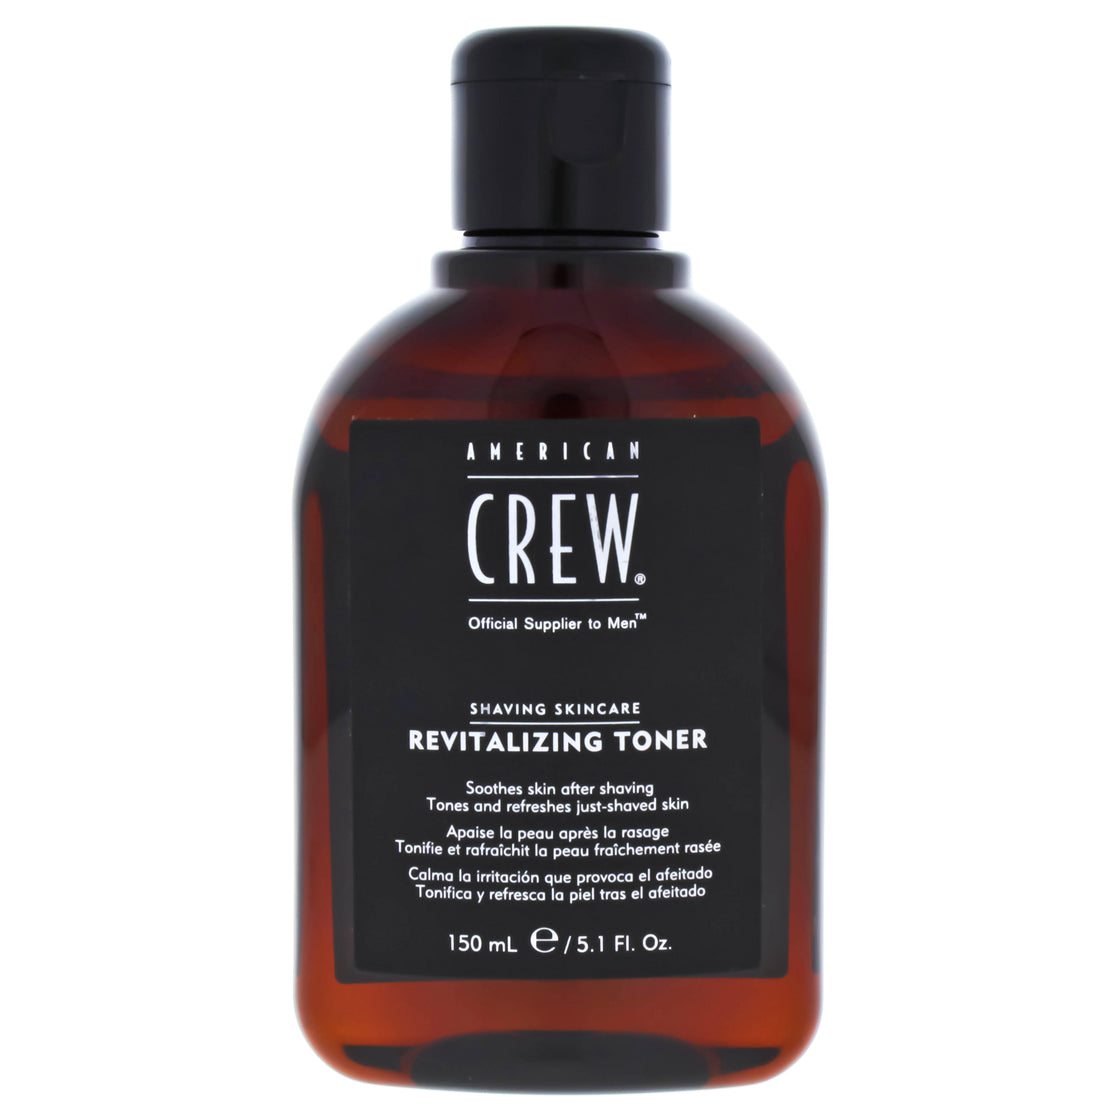 Revitalizing Toner by American Crew for Men - 5.1 oz Aftershave